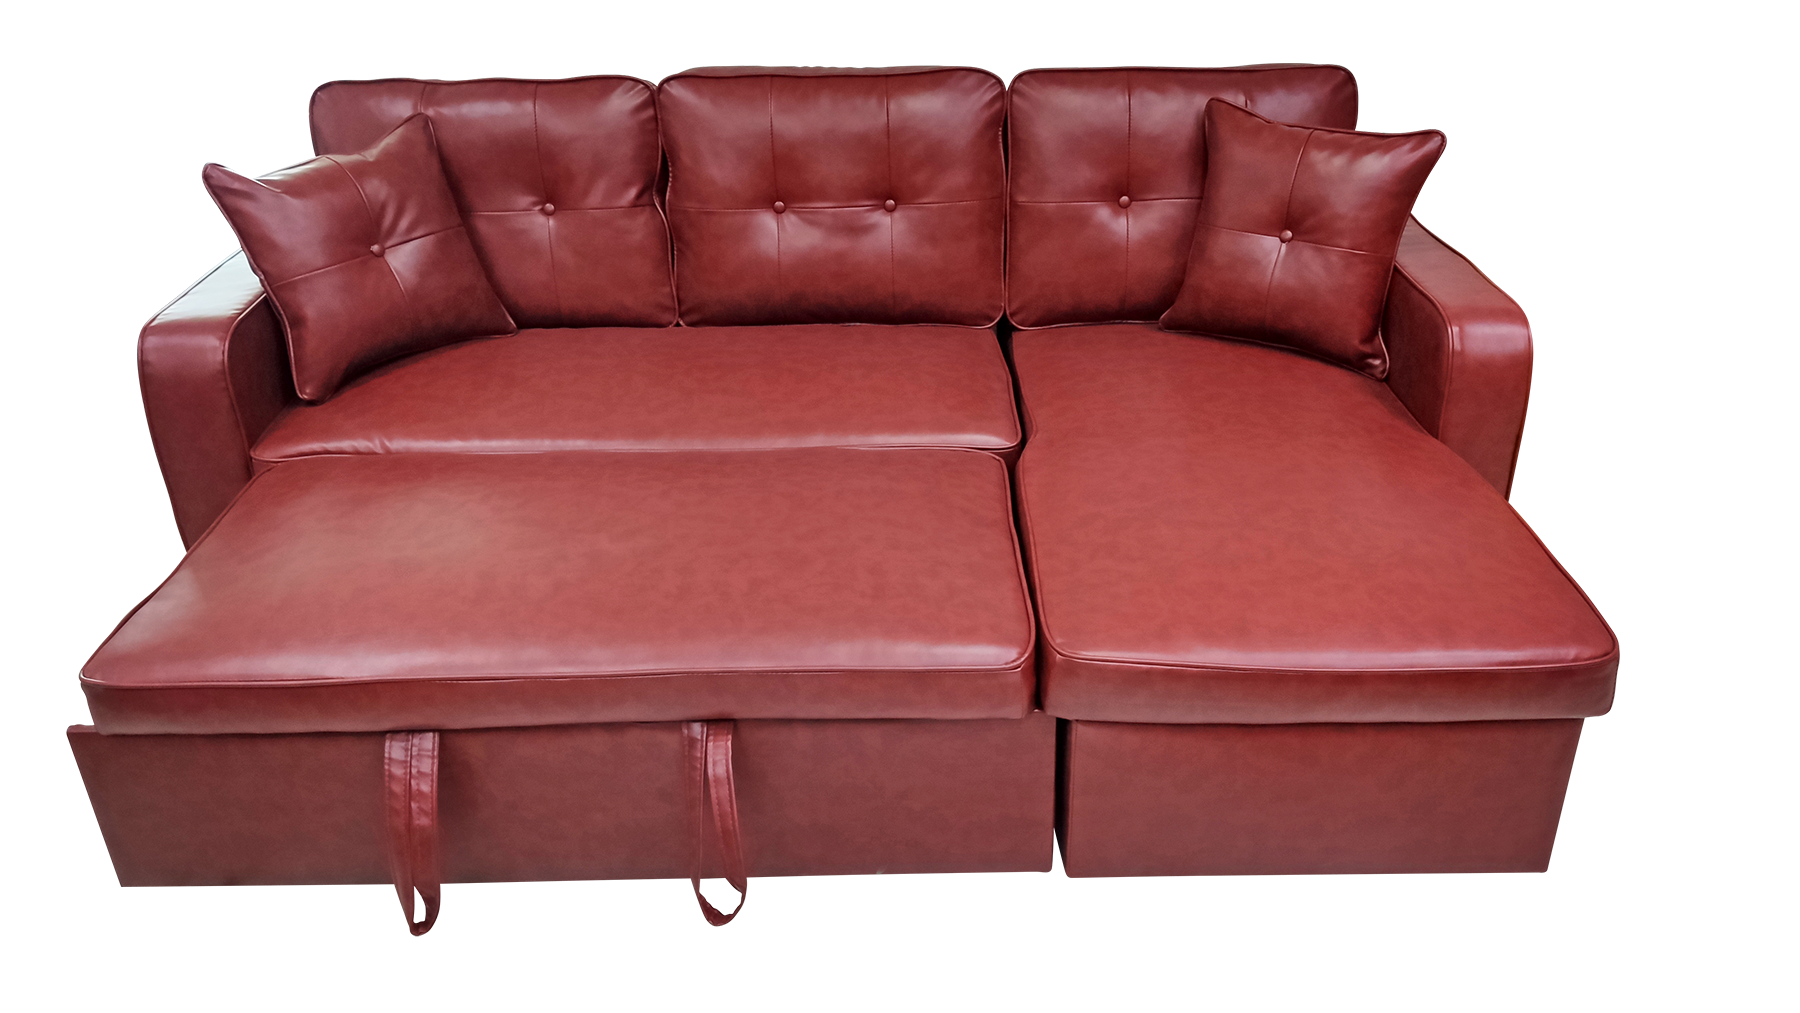 New Aspen Sofa Bed Synthetic Leather